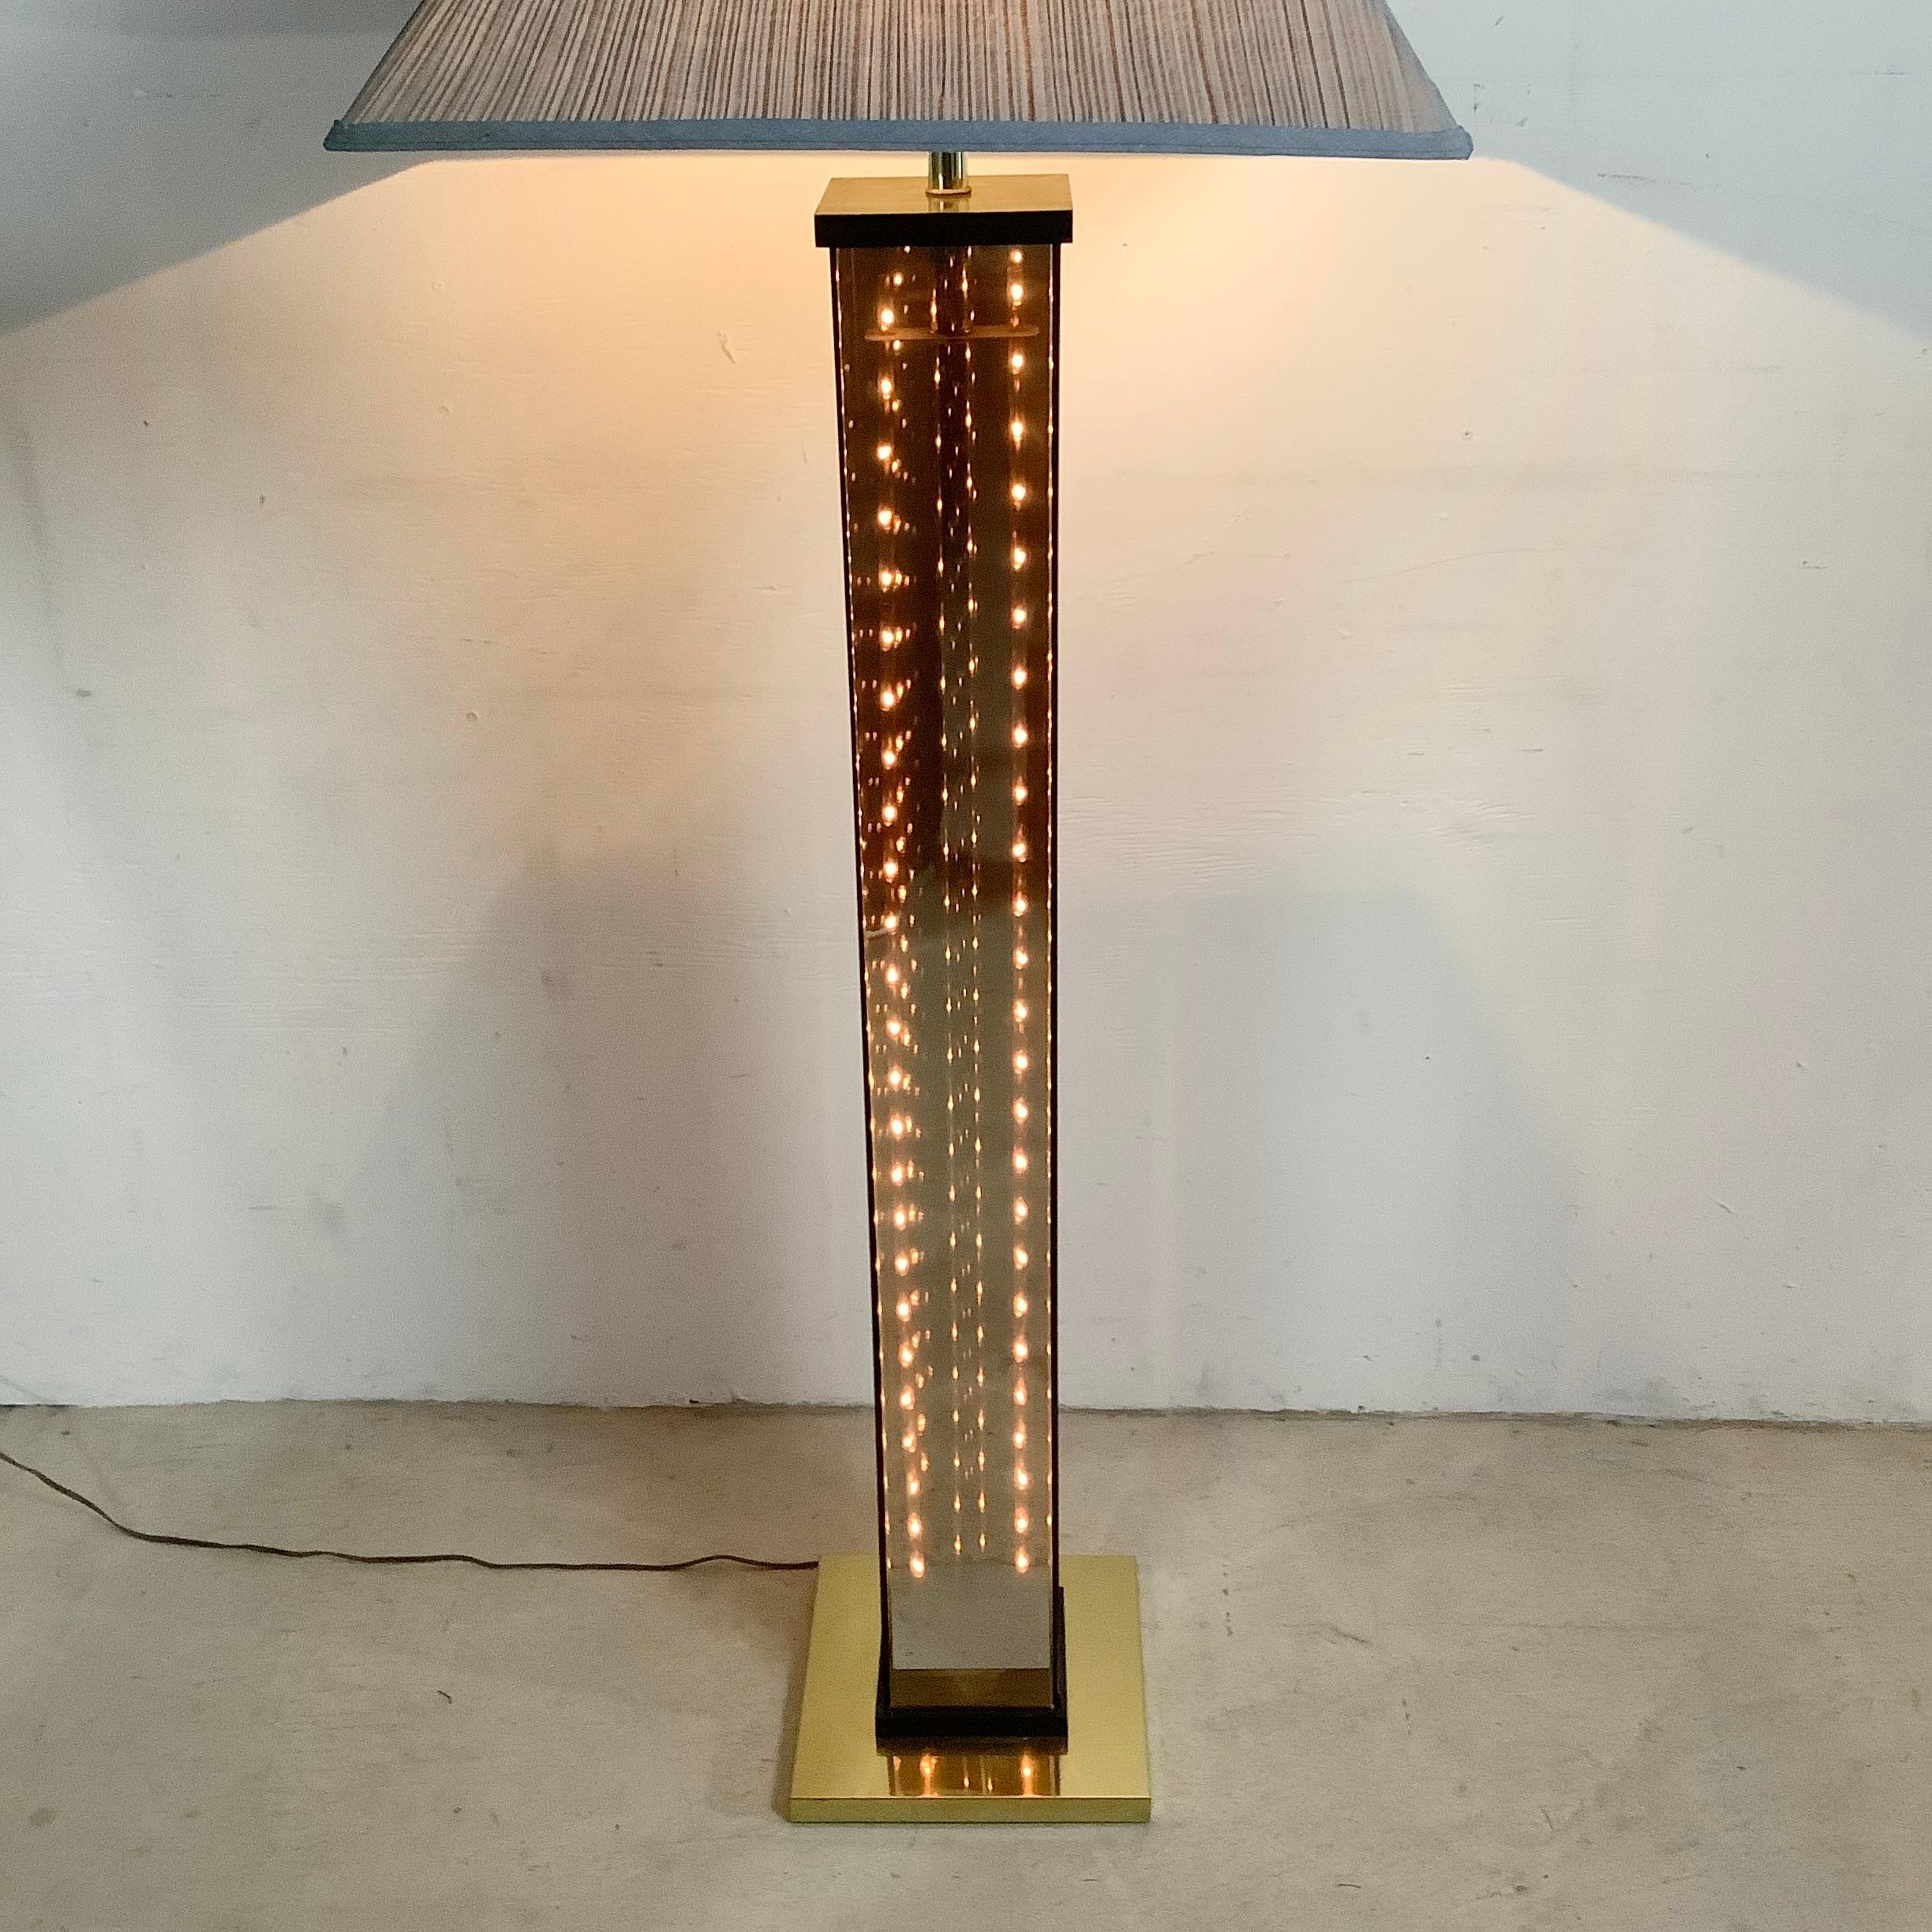 This stylish vintage modern floor lamp features a unique Gaetano Sciolari like style with brass finish base and smoked glass sides- the three way light switch allows you to choose between the upper lamp only, interior runner lights only, or both